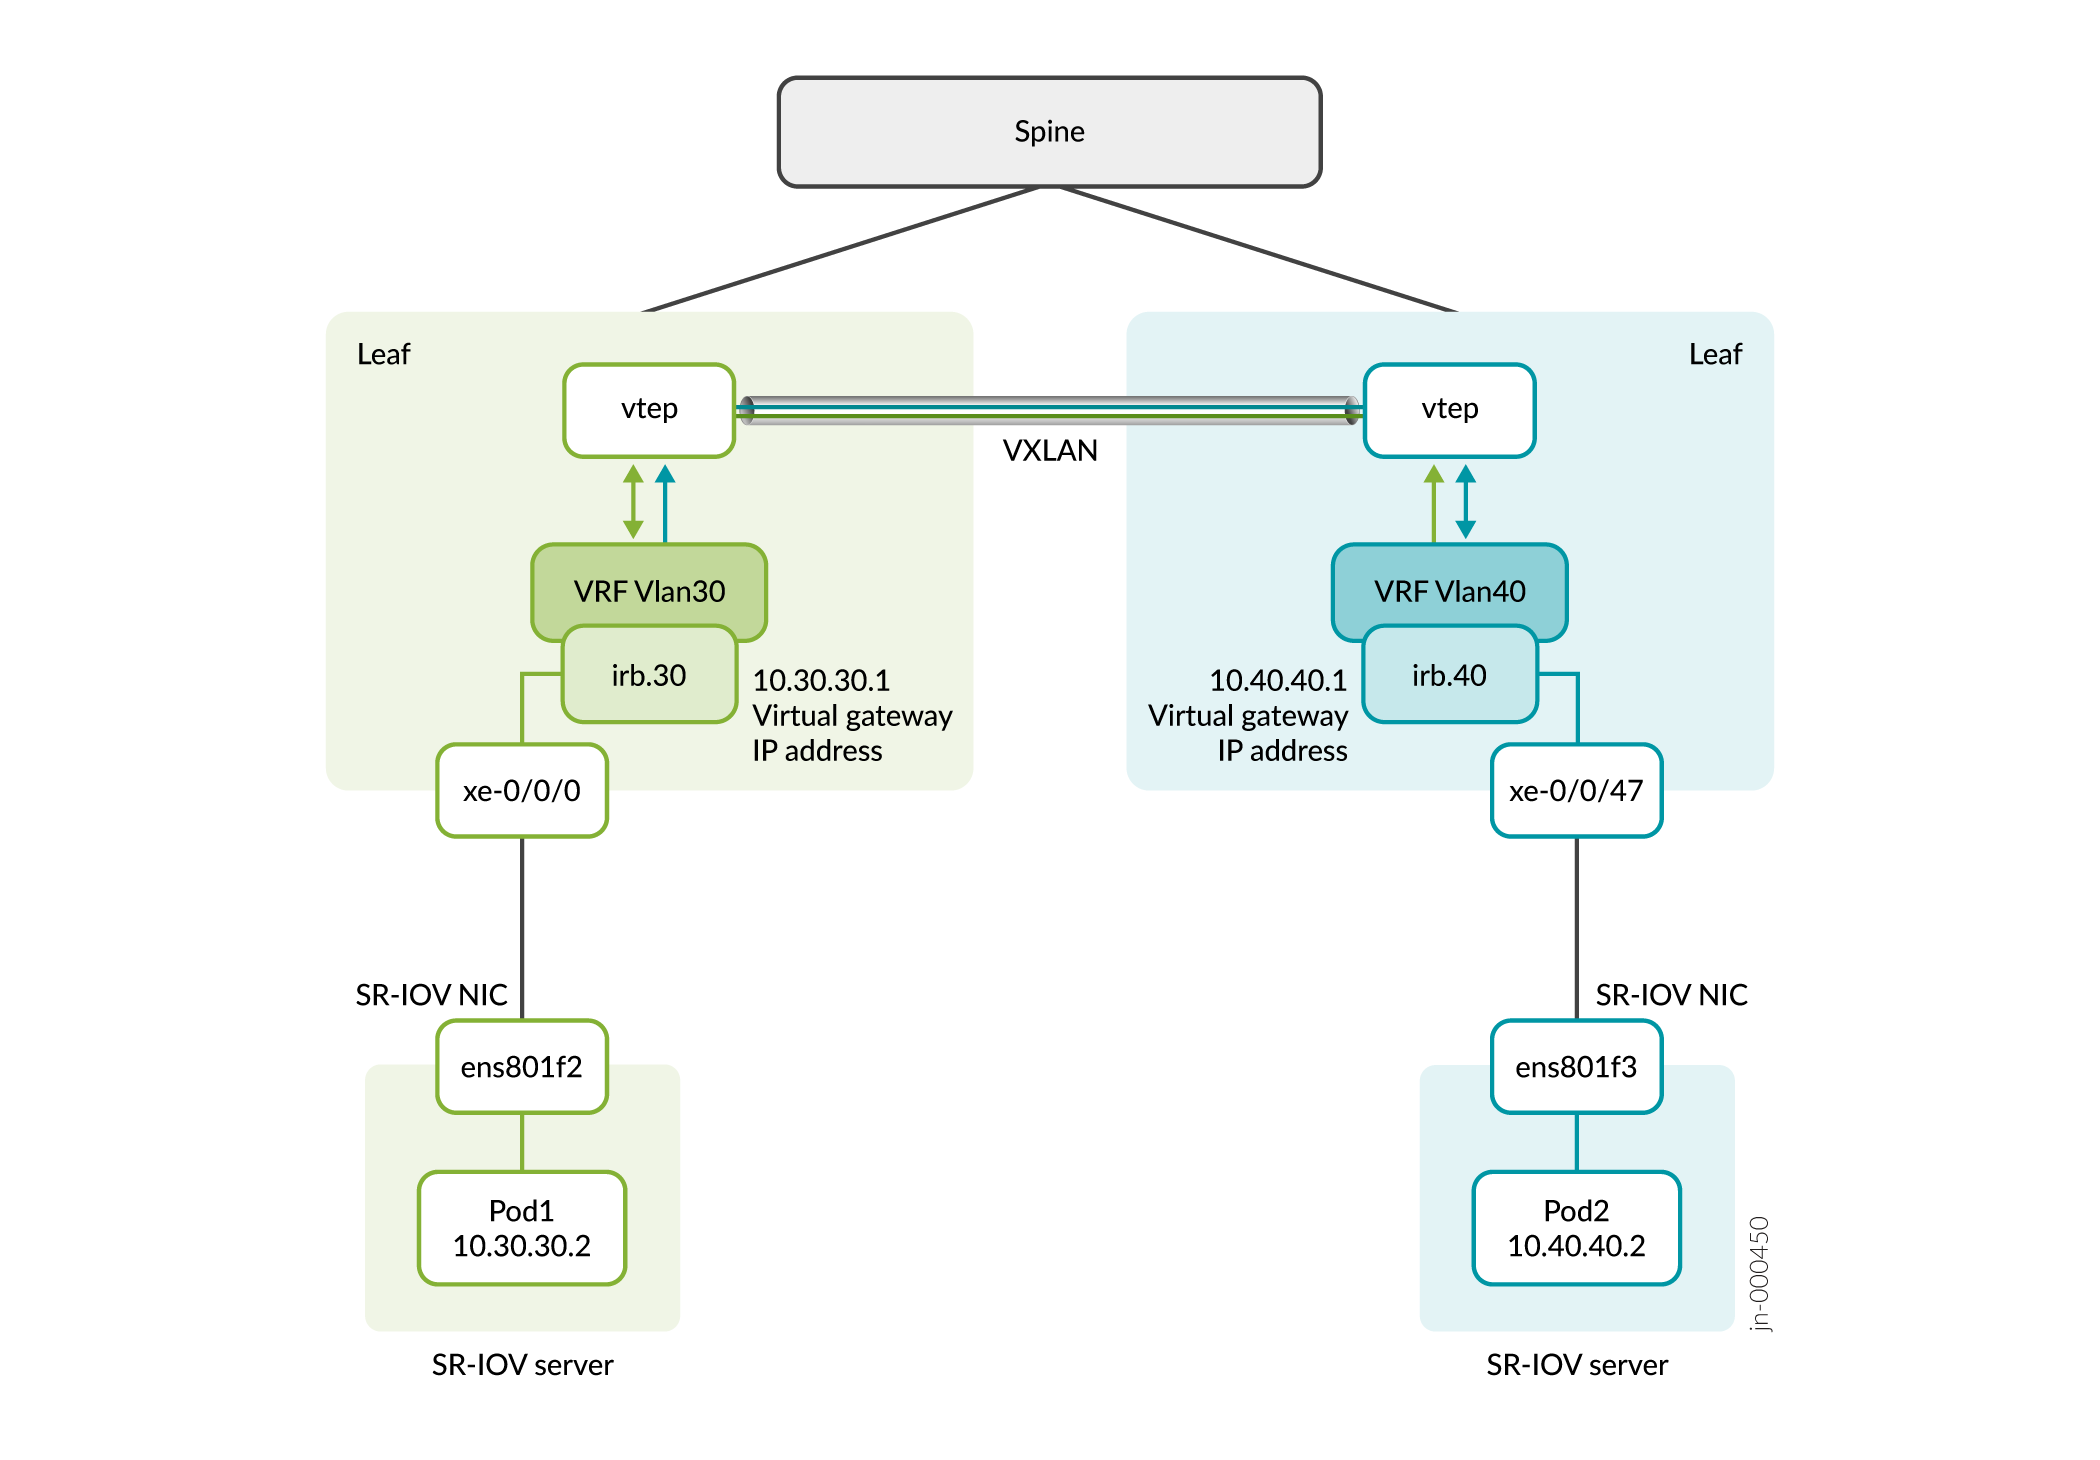 Inter-VNI Routing: Pods That Belong to Different Virtual Networks